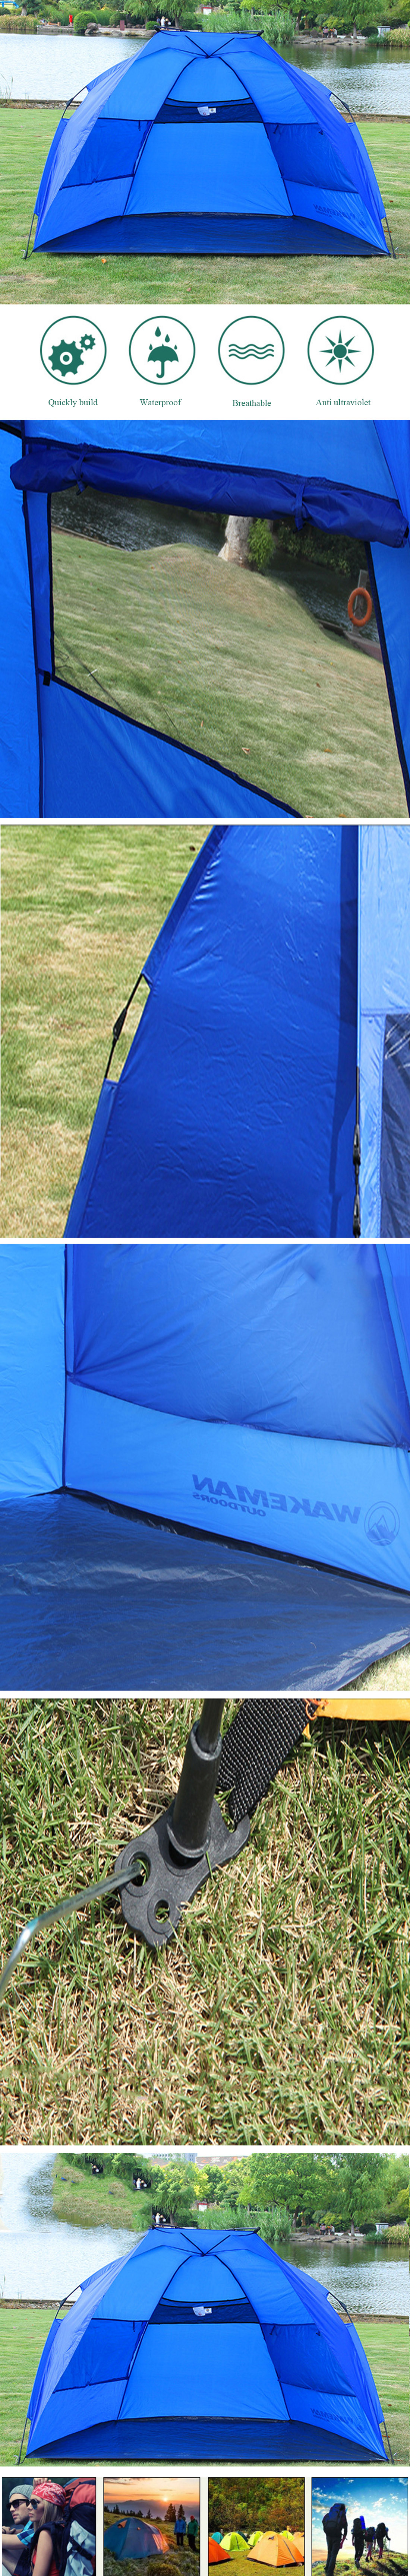 1-2-People-Outdoor-Camping-Tent-Waterprood-Automatic-Beach-Sunshade-Shelter-Canopy-1380725